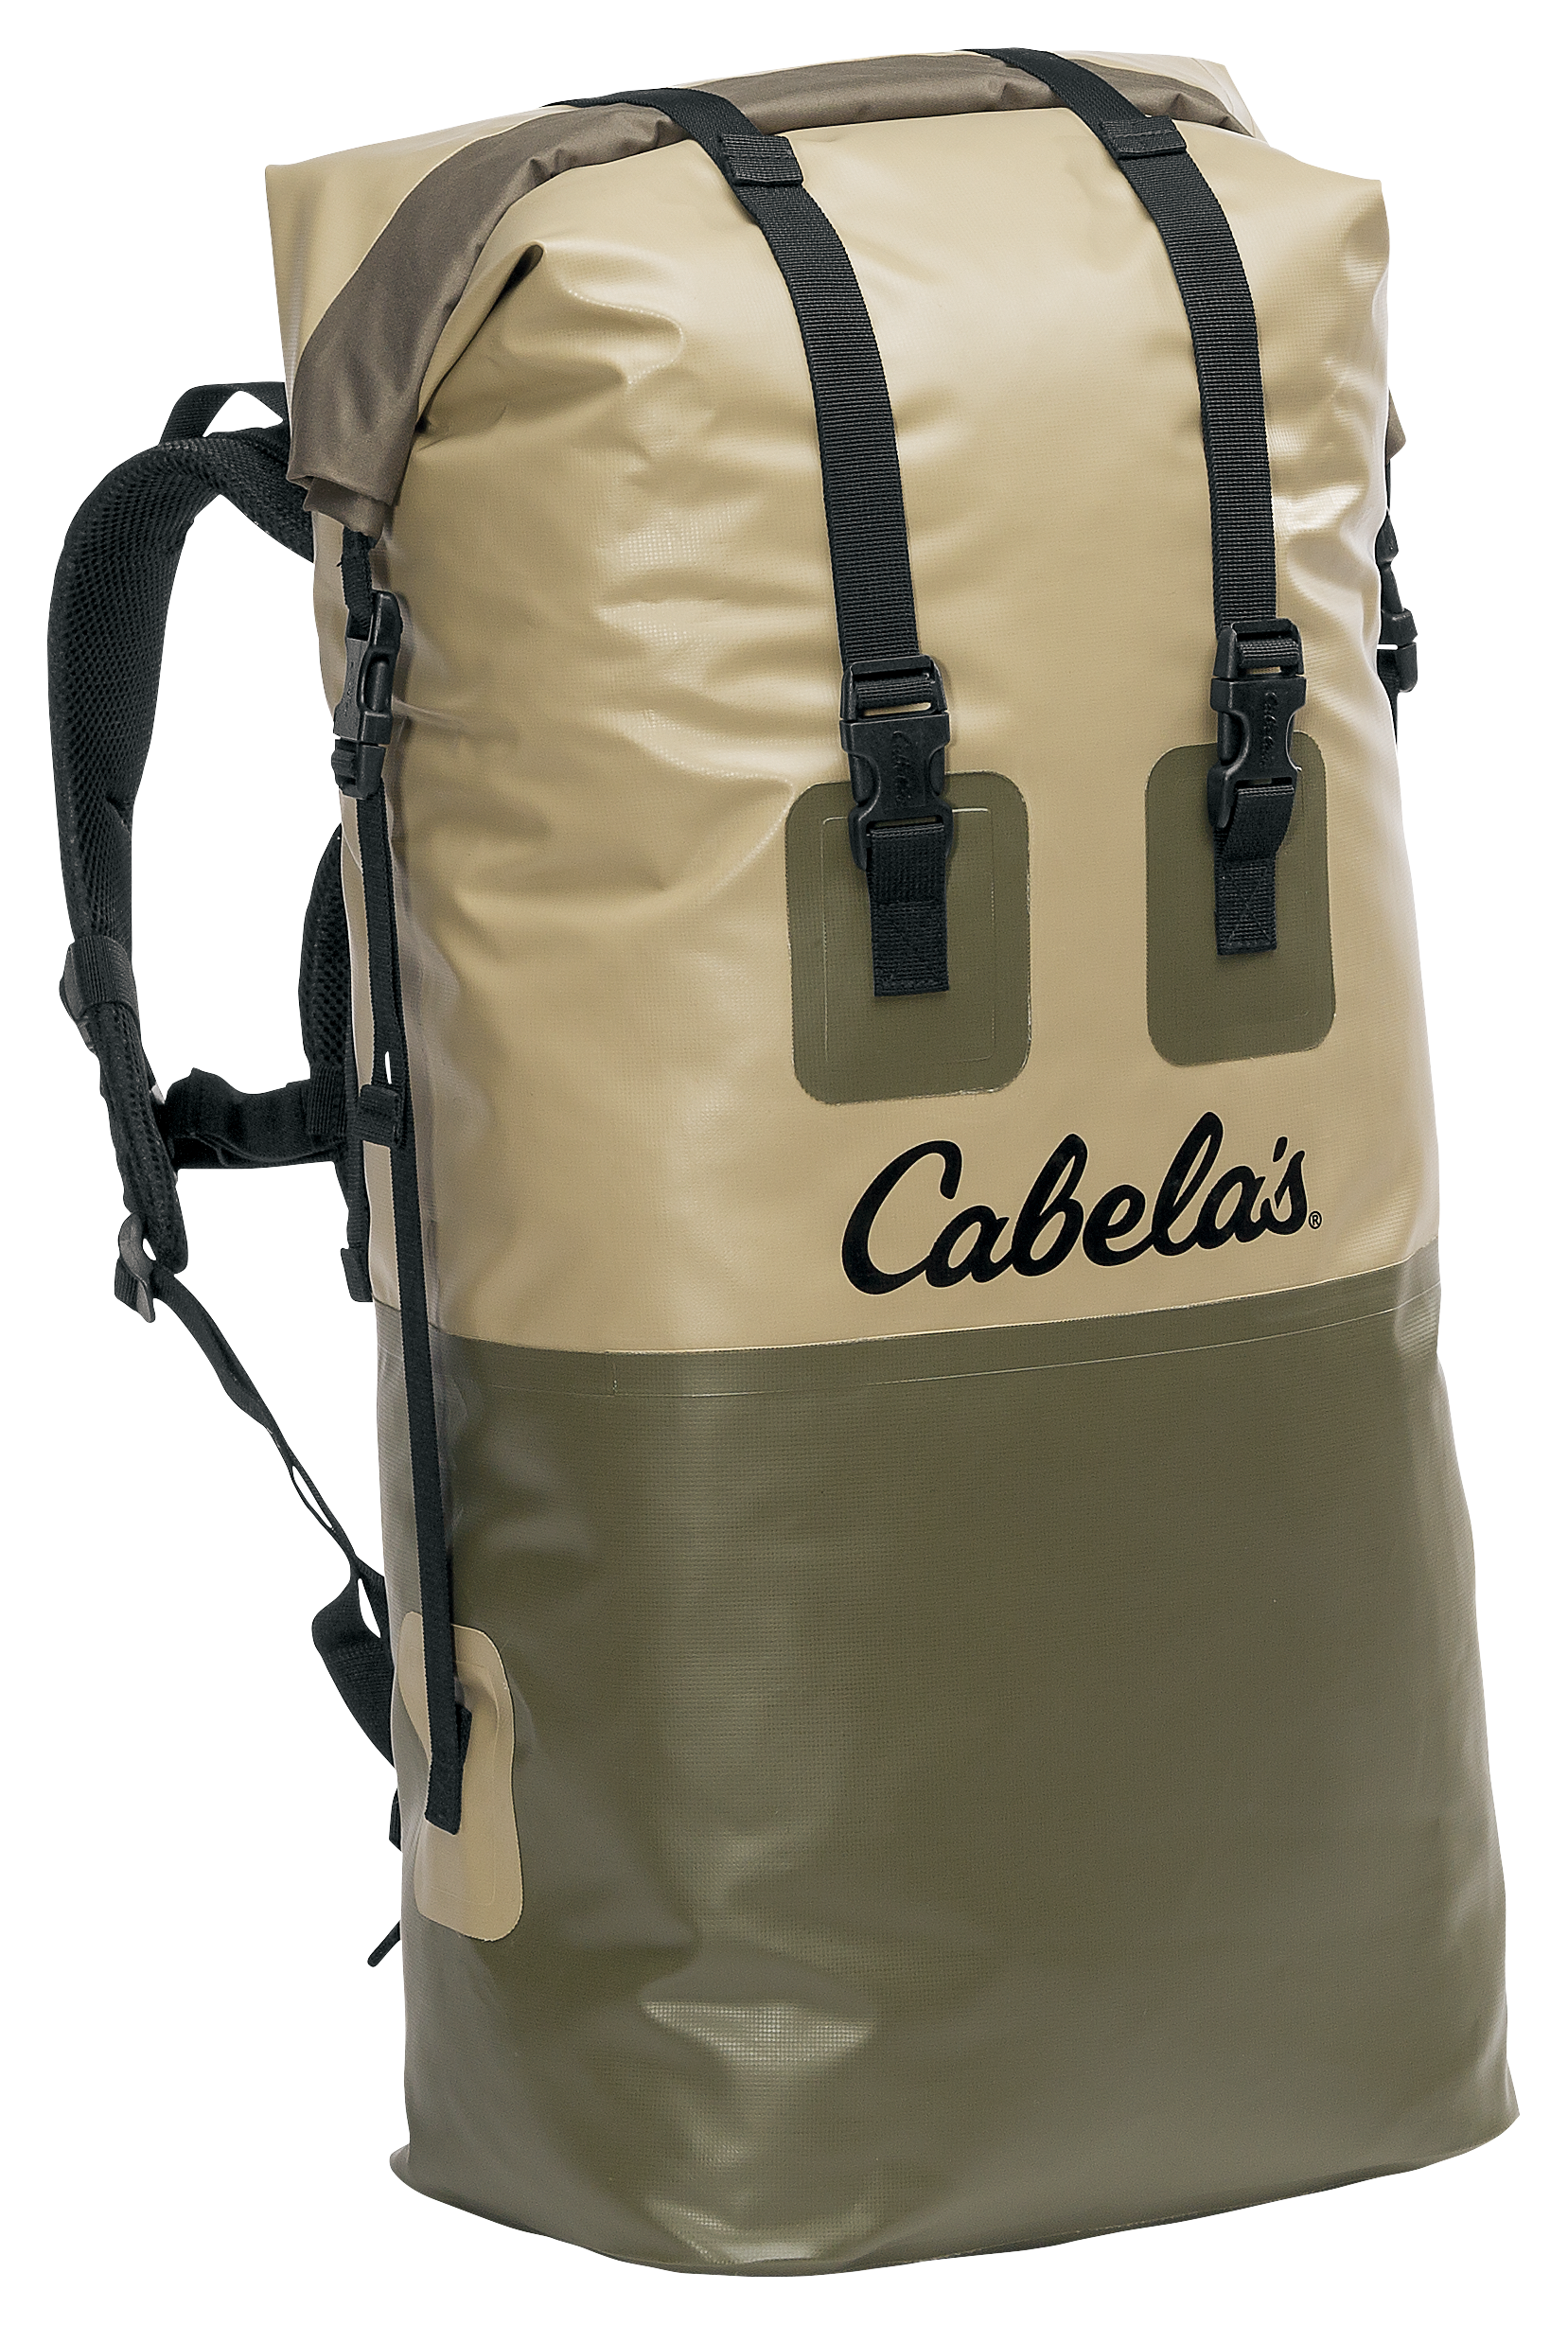 Cabela's Boundary Waters Roll-Top Backpack - Tan - 70L - Regular 31'x14'x10